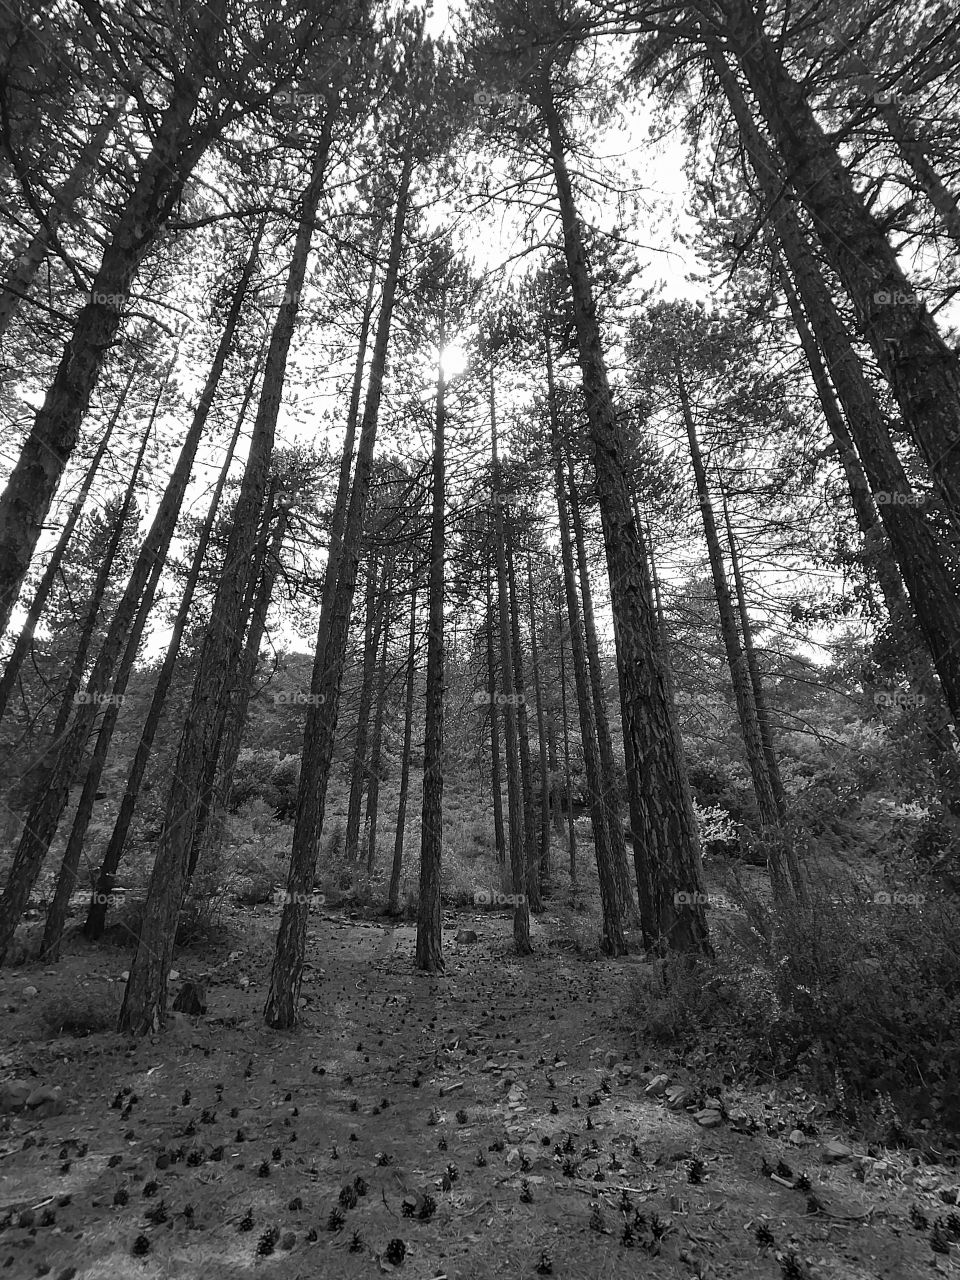 Black and white forest at Troodos Cyprus